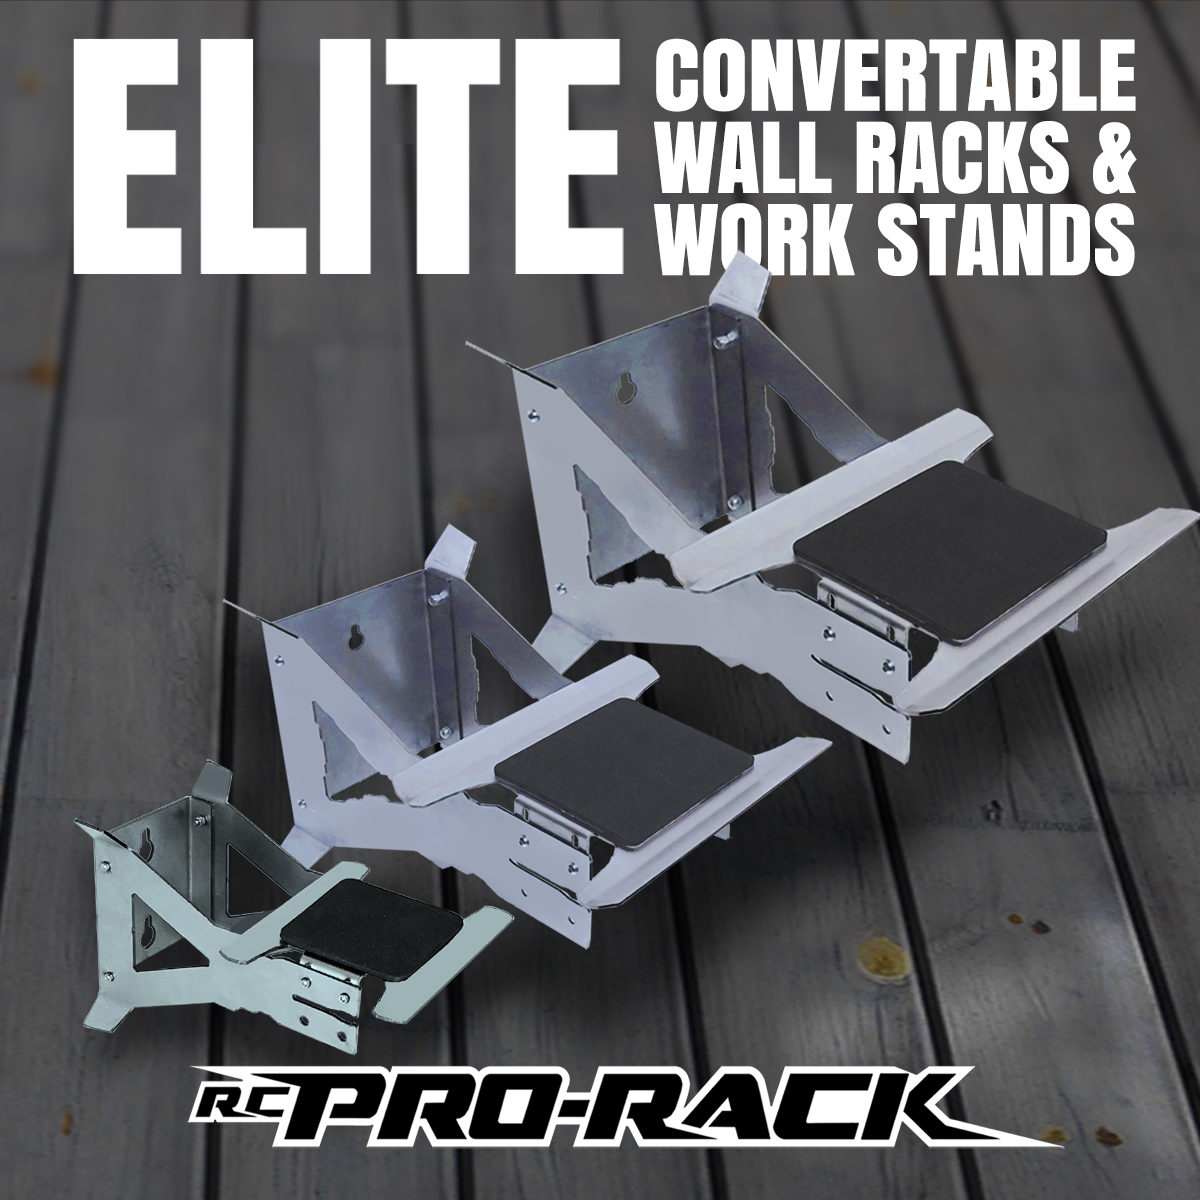 RC PRO RACK ELITE WALL MOUNTED DISPLAY, STORAGE & WORK STAND COMBOS